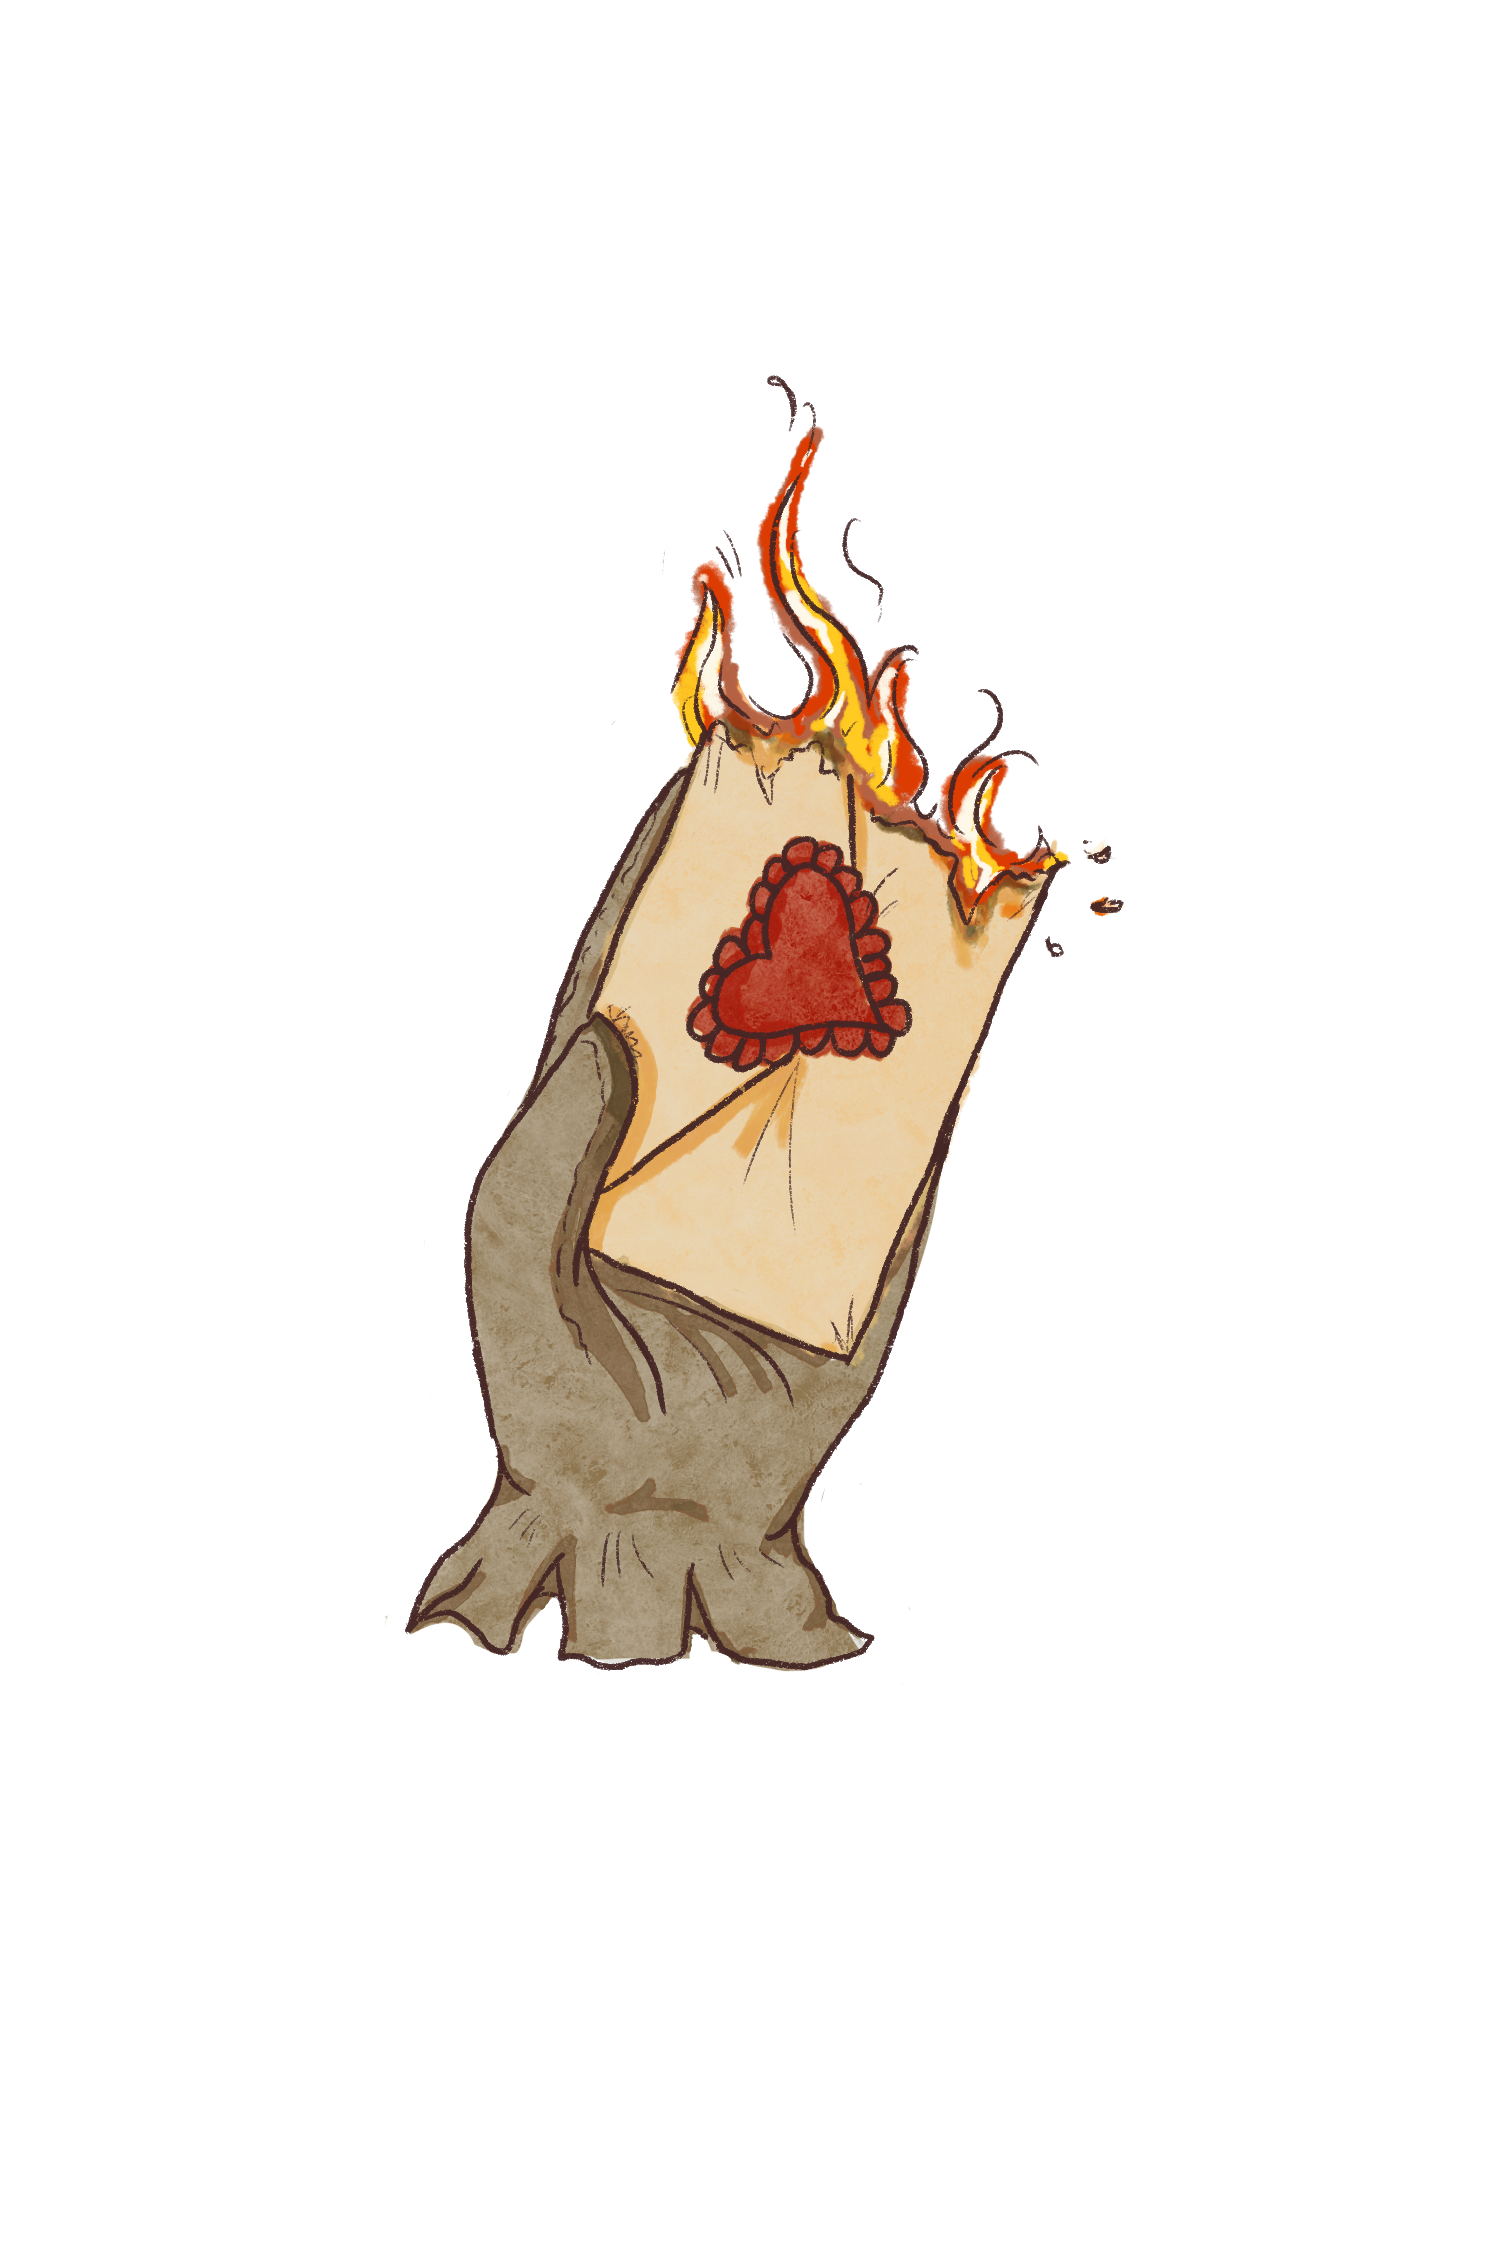 Gloved hand holding a burning envelope with a heart on the envelope